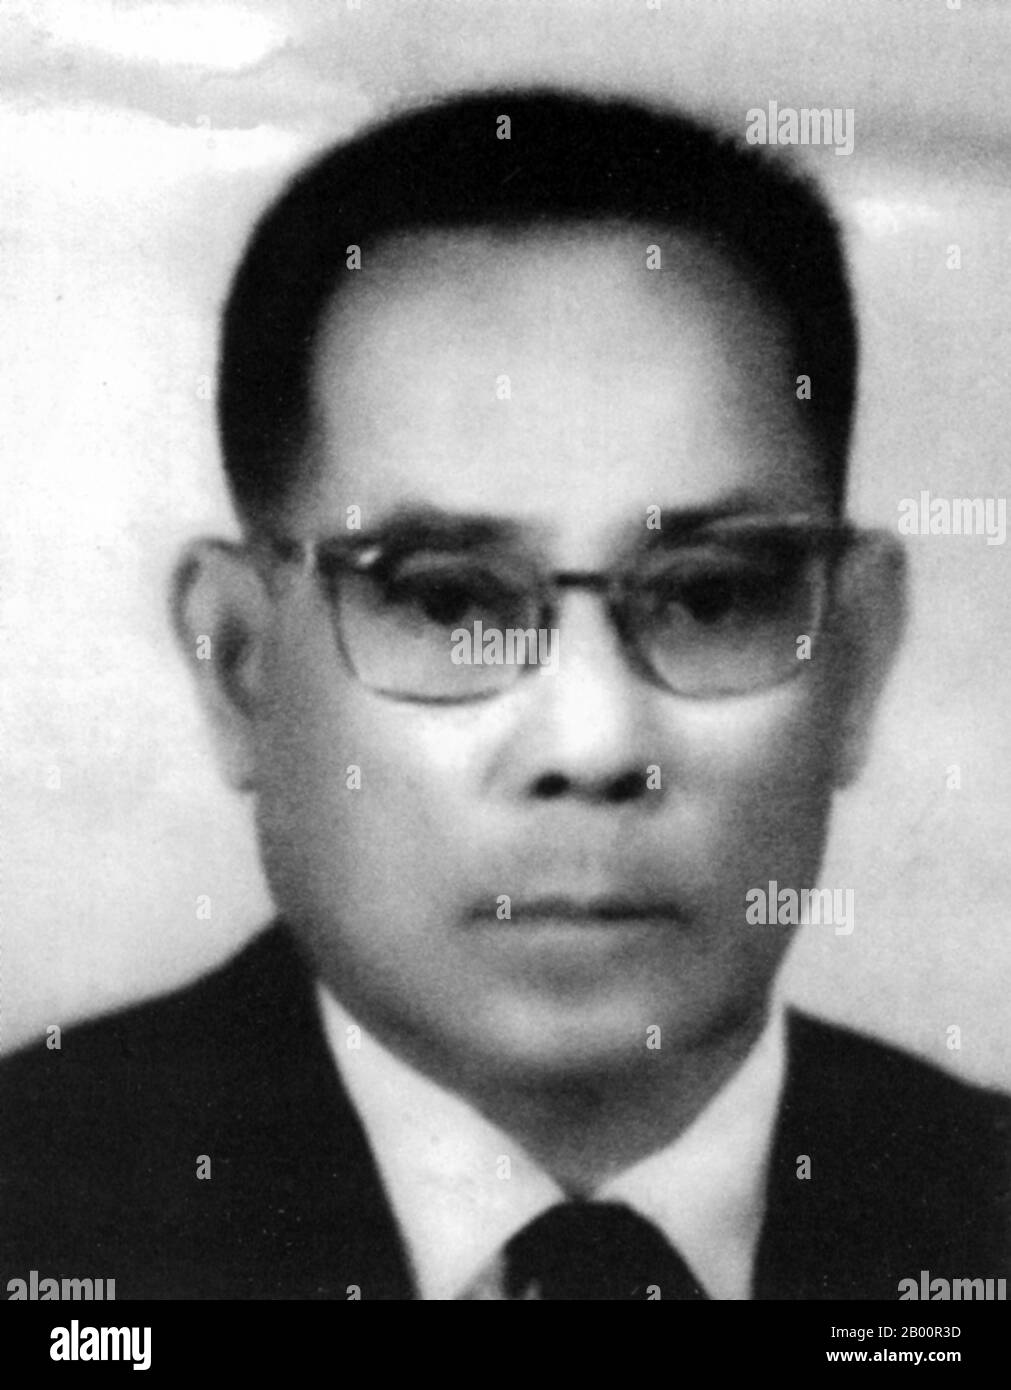 Cambodia: Son Ngoc Thanh (1908–1977) was a Cambodian nationalist and republican politician.  Son Ngoc Thanh (1908–1977) was a Cambodian nationalist and republican politician, with a long history as a rebel and (for brief periods) as a government minister. He was an arch opponent of King Norodom Sihanouk, and an anti-communist. He died in custody in Vietnam in 1977. Stock Photo